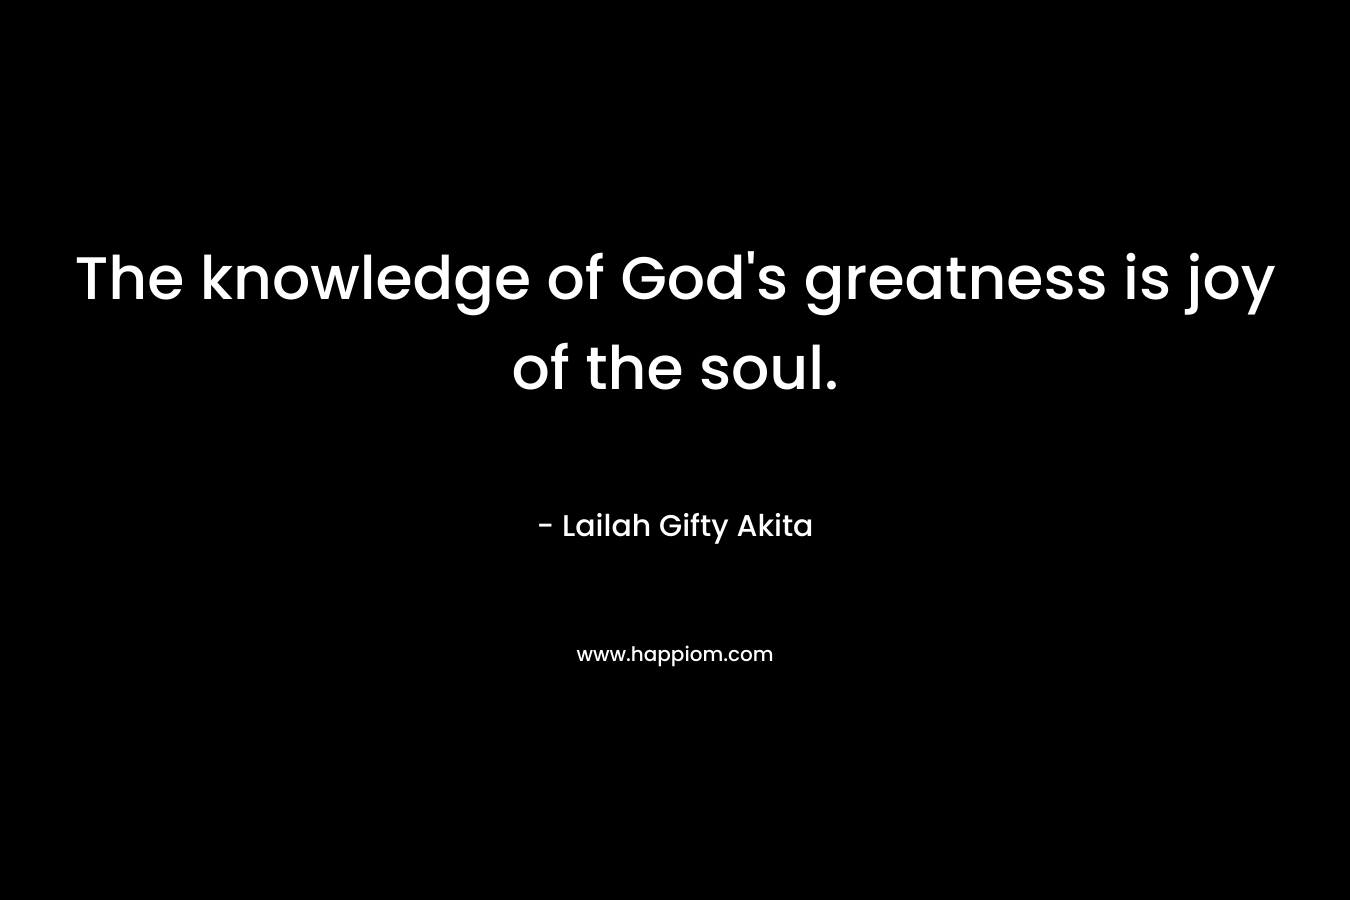 The knowledge of God's greatness is joy of the soul.